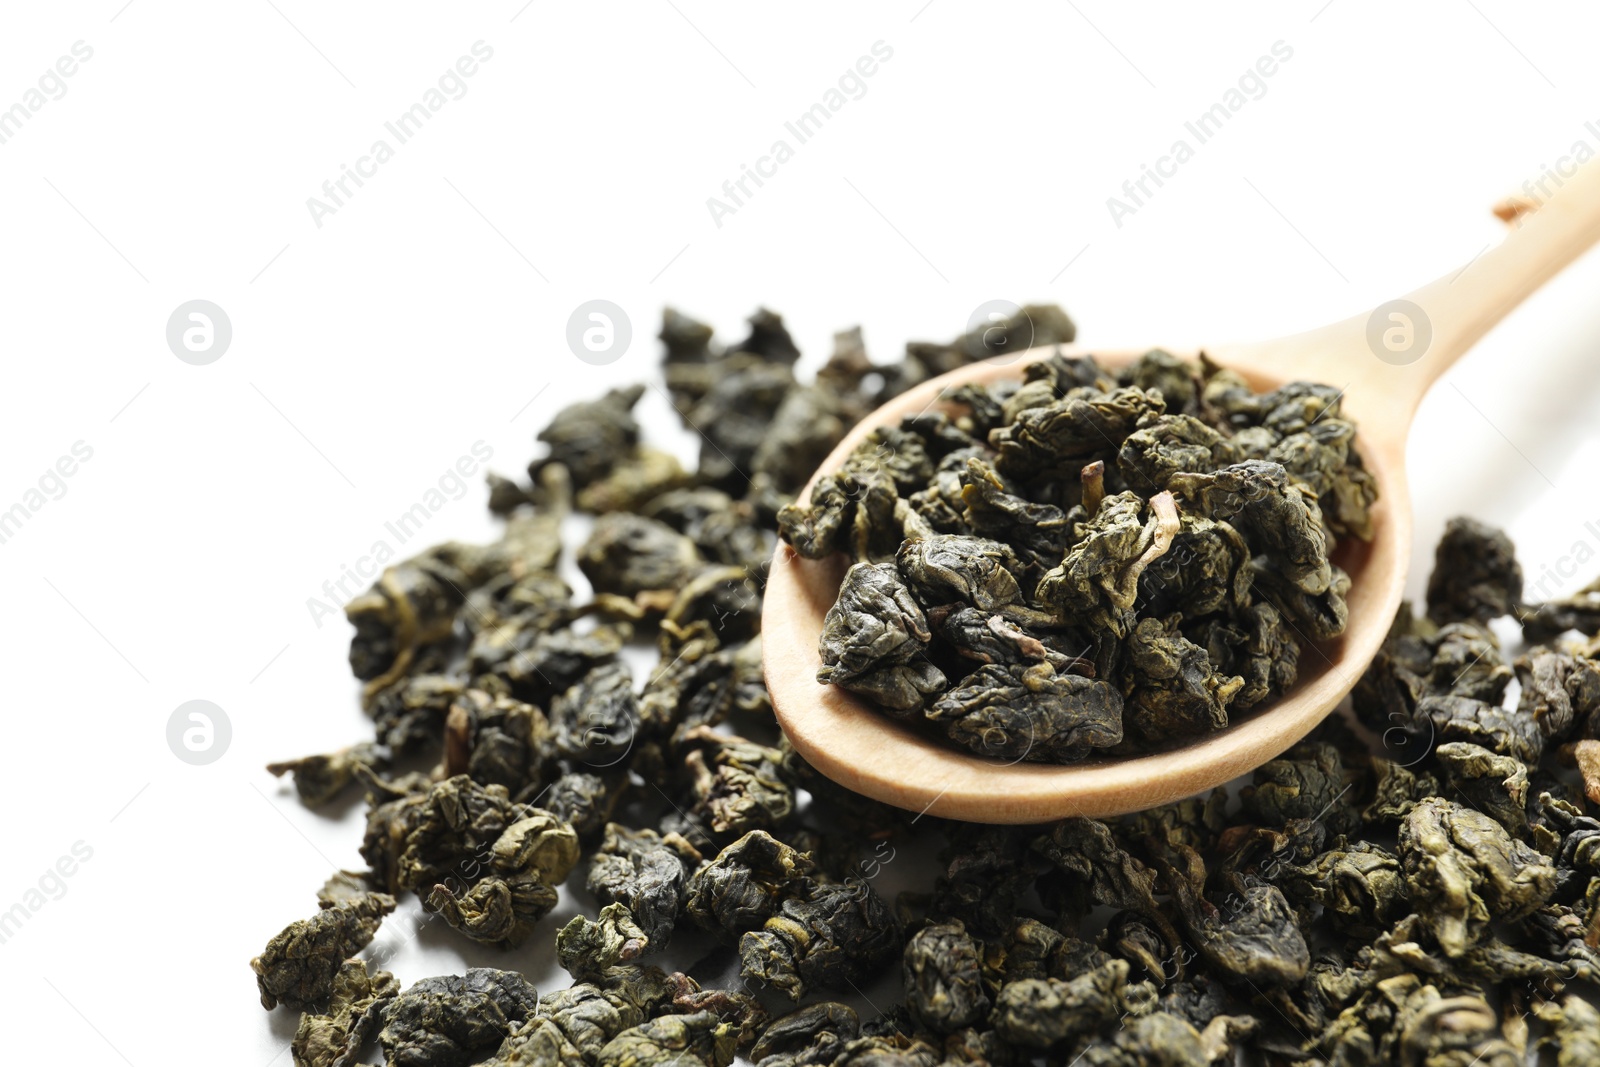 Photo of Tie Guan Yin oolong tea leaves and spoon on white background, closeup